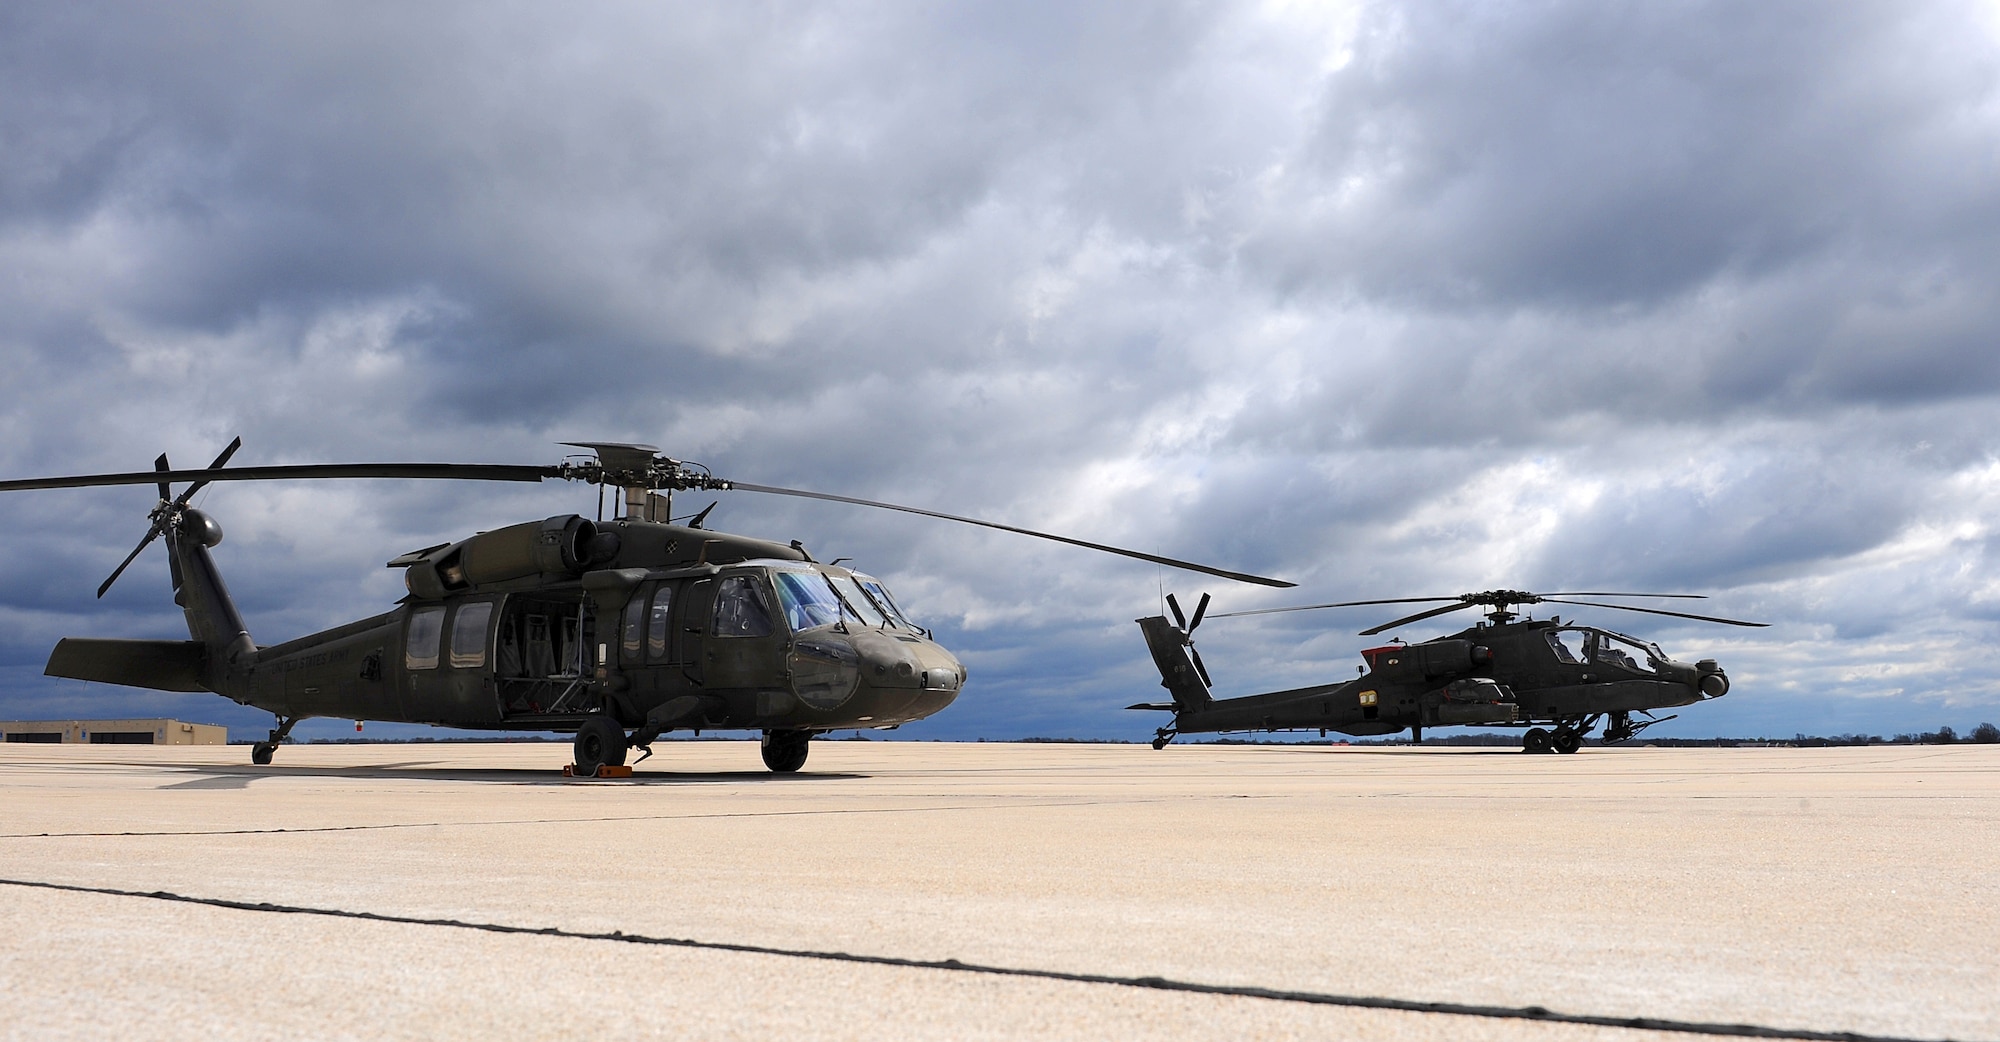 A Missouri Army National Guard UH-60 Black Hawk utility helicopter, left, sits next to an AH-64 Apache attack helicopter on the flightline at Whiteman Air Force Base, Mo., April 1, 2016. Black Hawk helicopters began arriving at the 1-135th Attack Reconnaissance Battalion in September of 2015 as part of the Department of the Army’s Aviation Reconstruction Initiative. There are now 13 Apaches and 10 Black Hawks assigned to the unit. (U.S. Air Force photo by Airman 1st Class Michaela R. Slanchik)